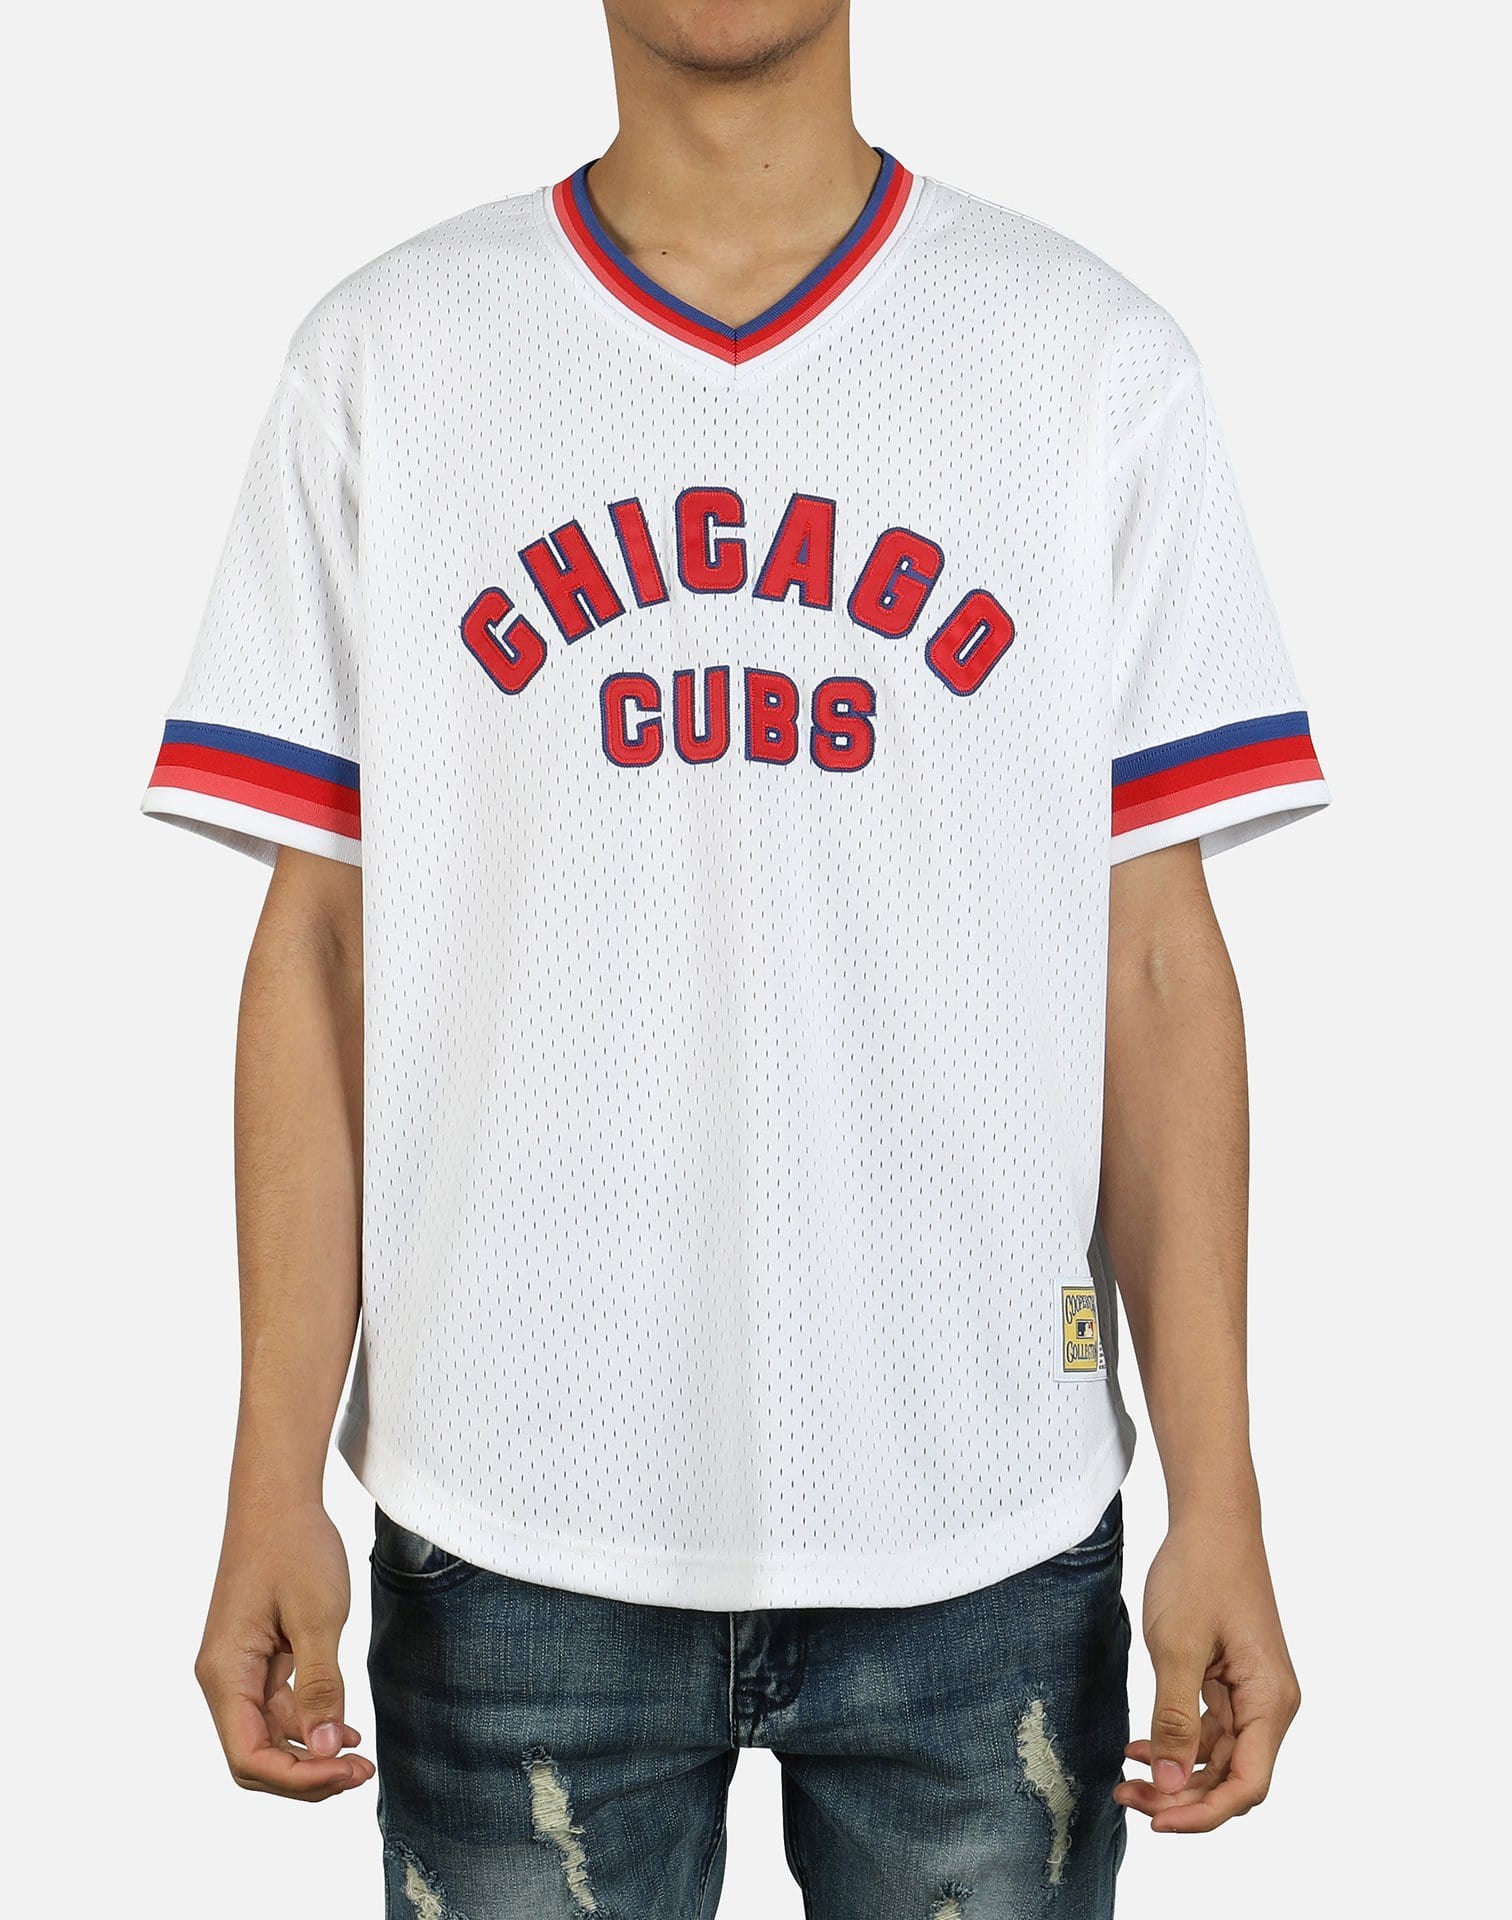 Mitchell & Ness MLB CHICAGO CUBS MESH V-NECK JERSEY – DTLR